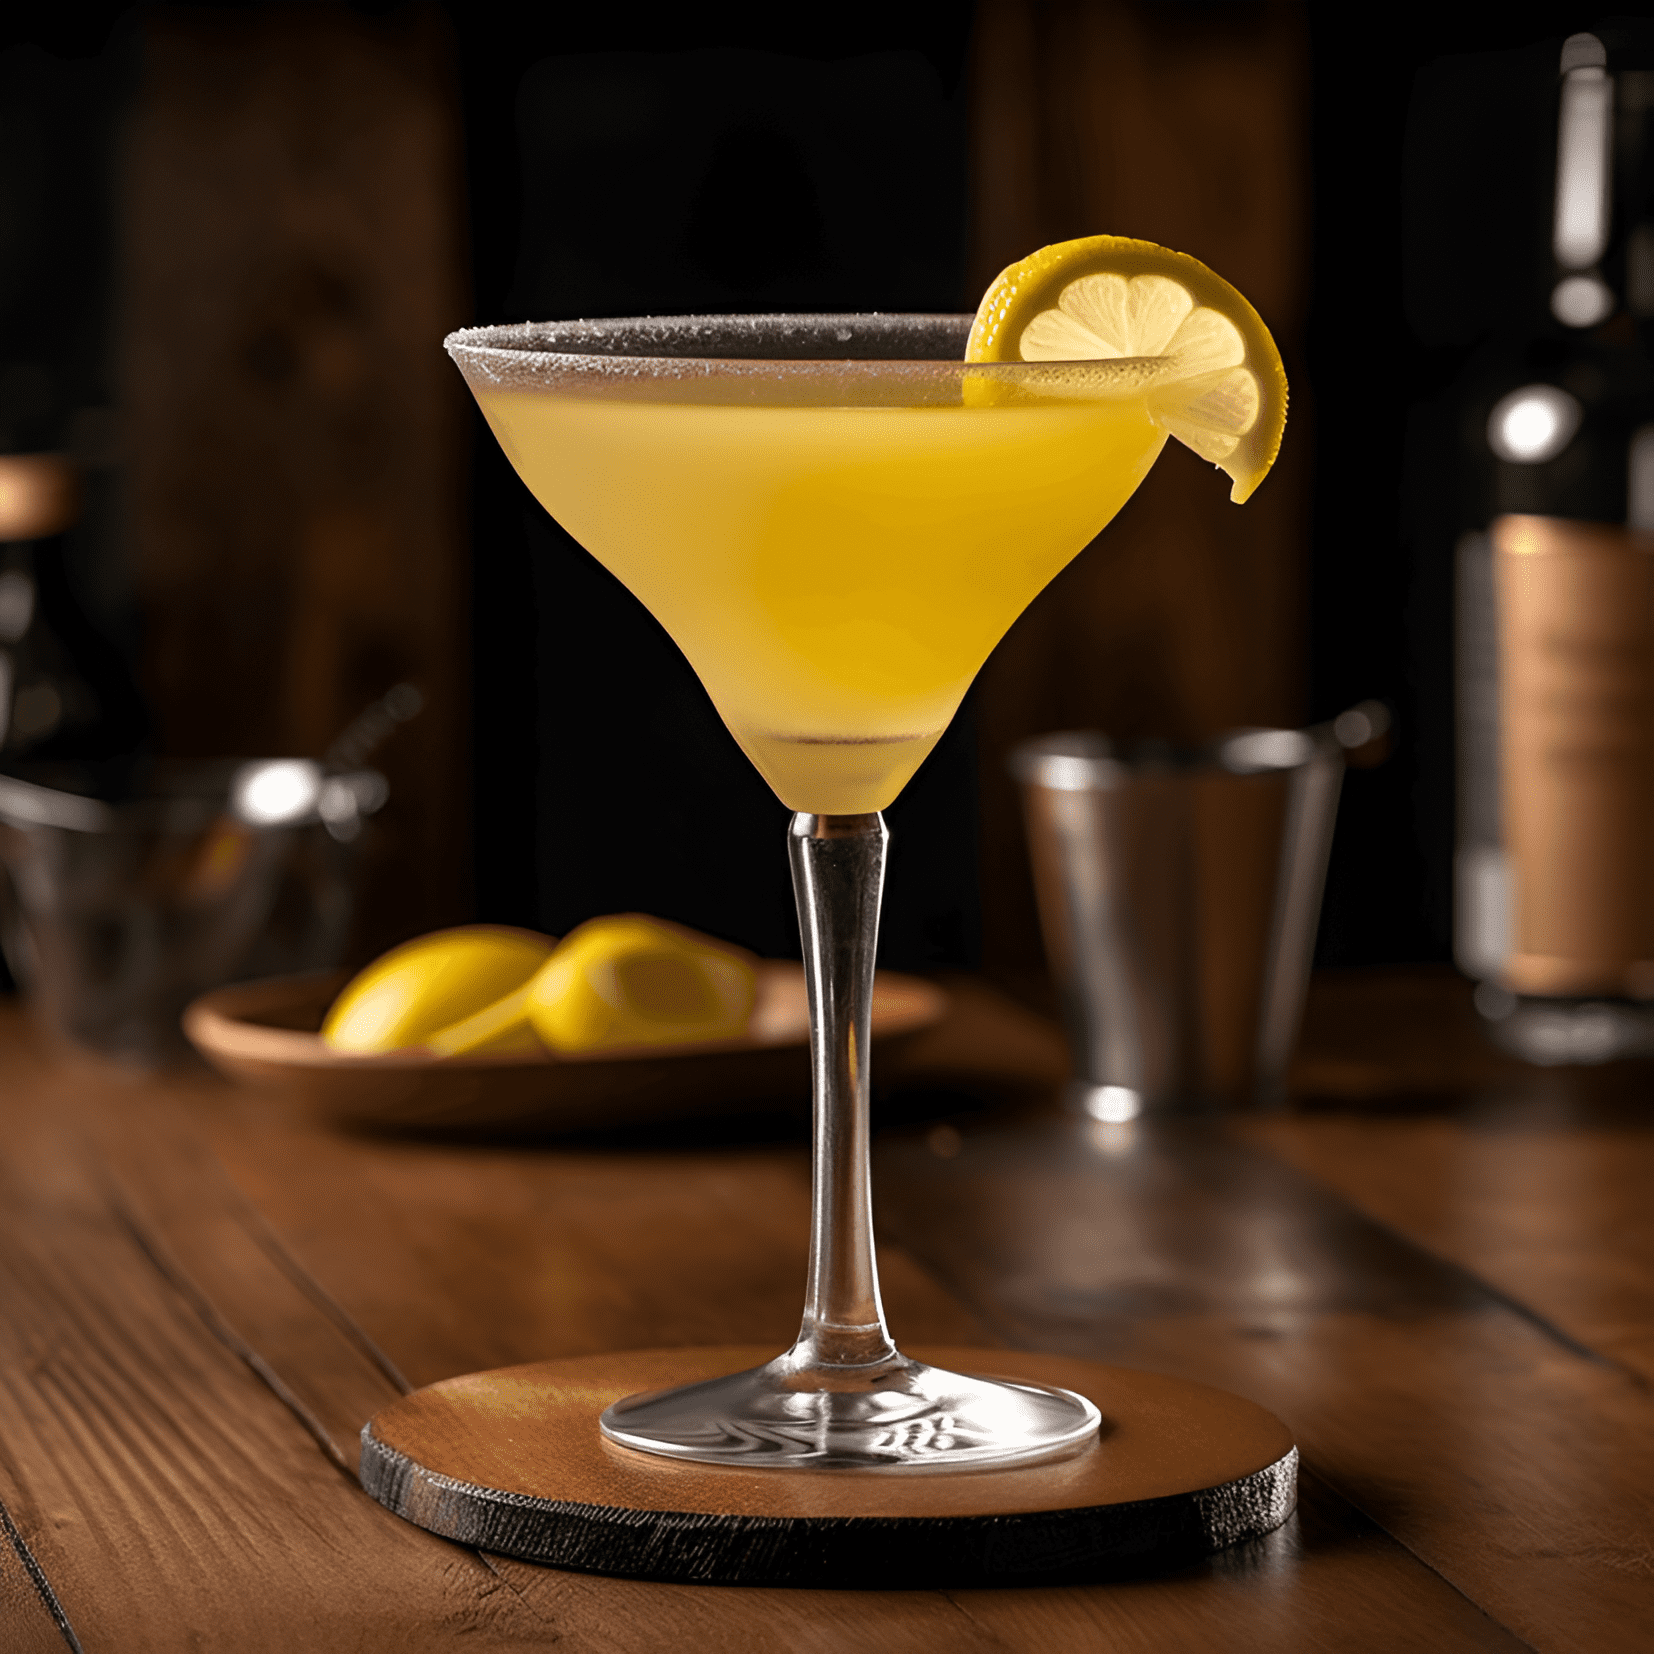 Yellow Parrot Cocktail Recipe - The Yellow Parrot has a complex, exotic taste that is both sweet and sour, with a hint of bitterness. The combination of apricot brandy, yellow Chartreuse, and gin creates a unique flavor profile that is fruity, herbal, and slightly spicy.